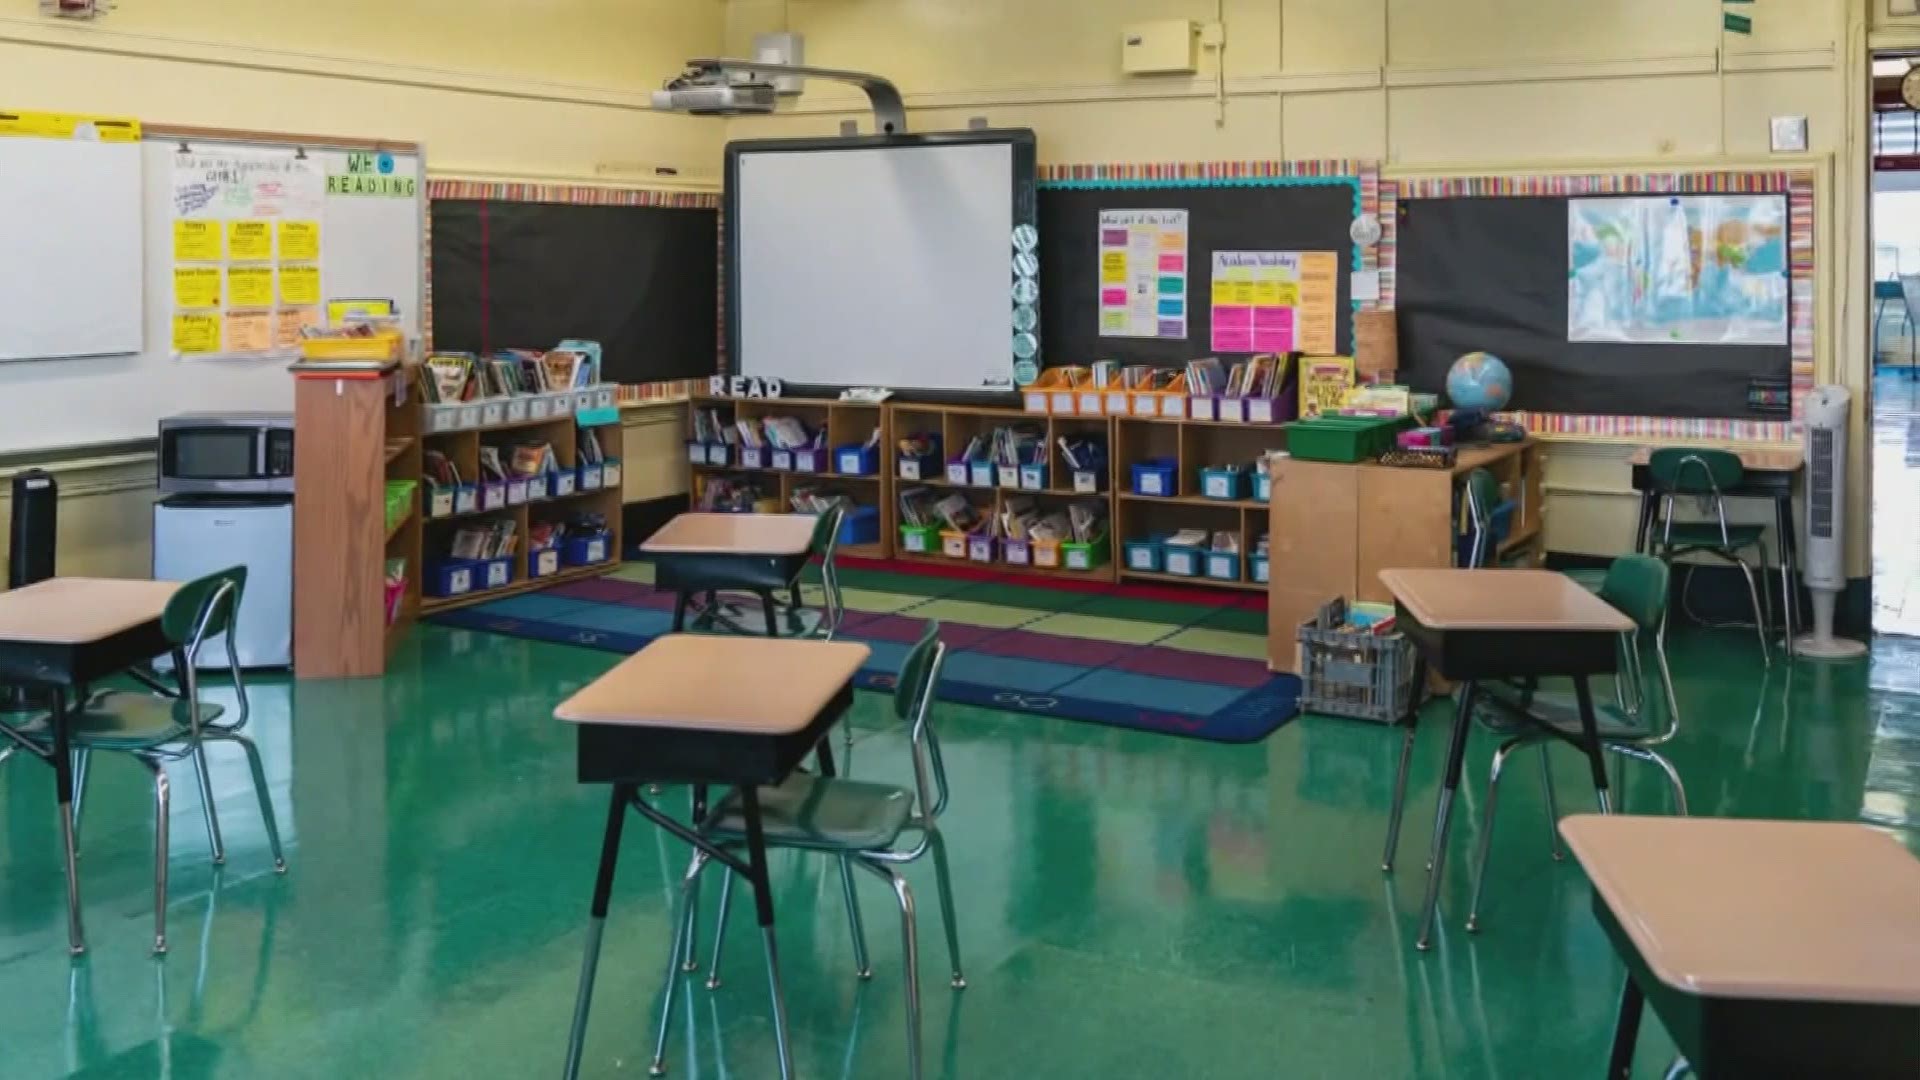 One Seattle doctor says good hand hygiene, good air ventilation, masking and social distancing is what it will take to keep kids safe from COVID-19 in classrooms.